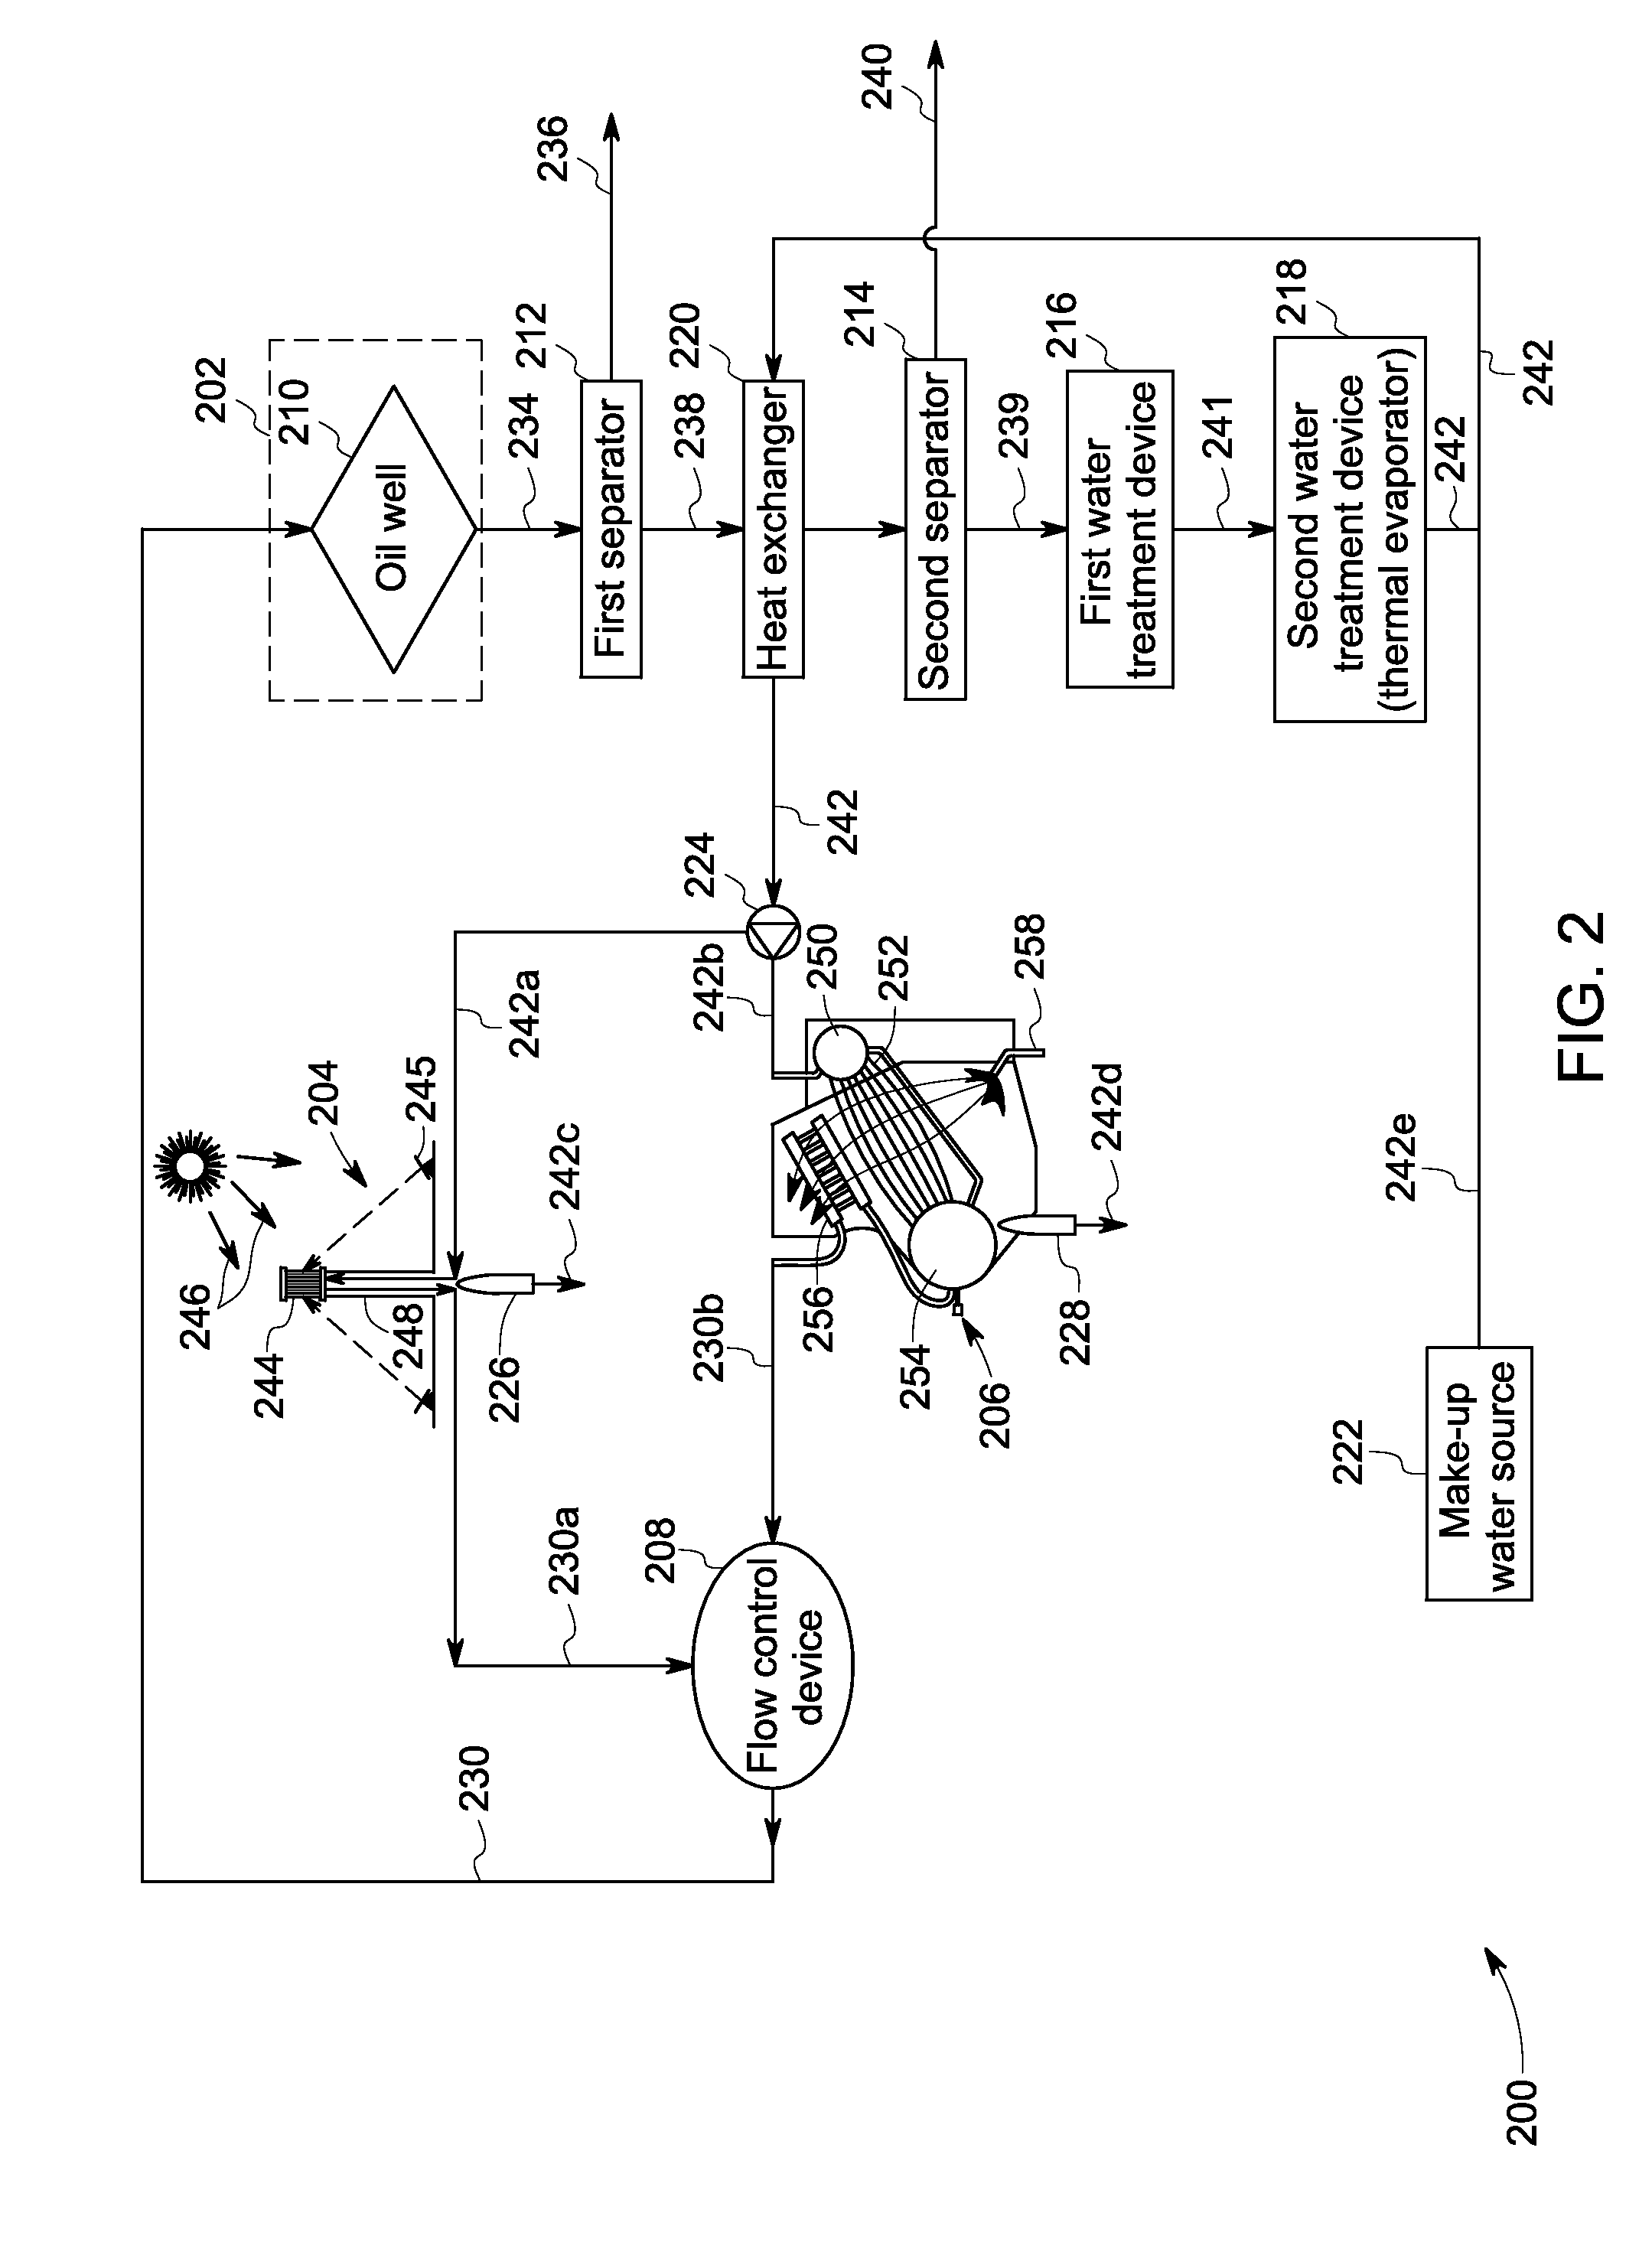 System and method for enhanced recovery of oil from an oil field